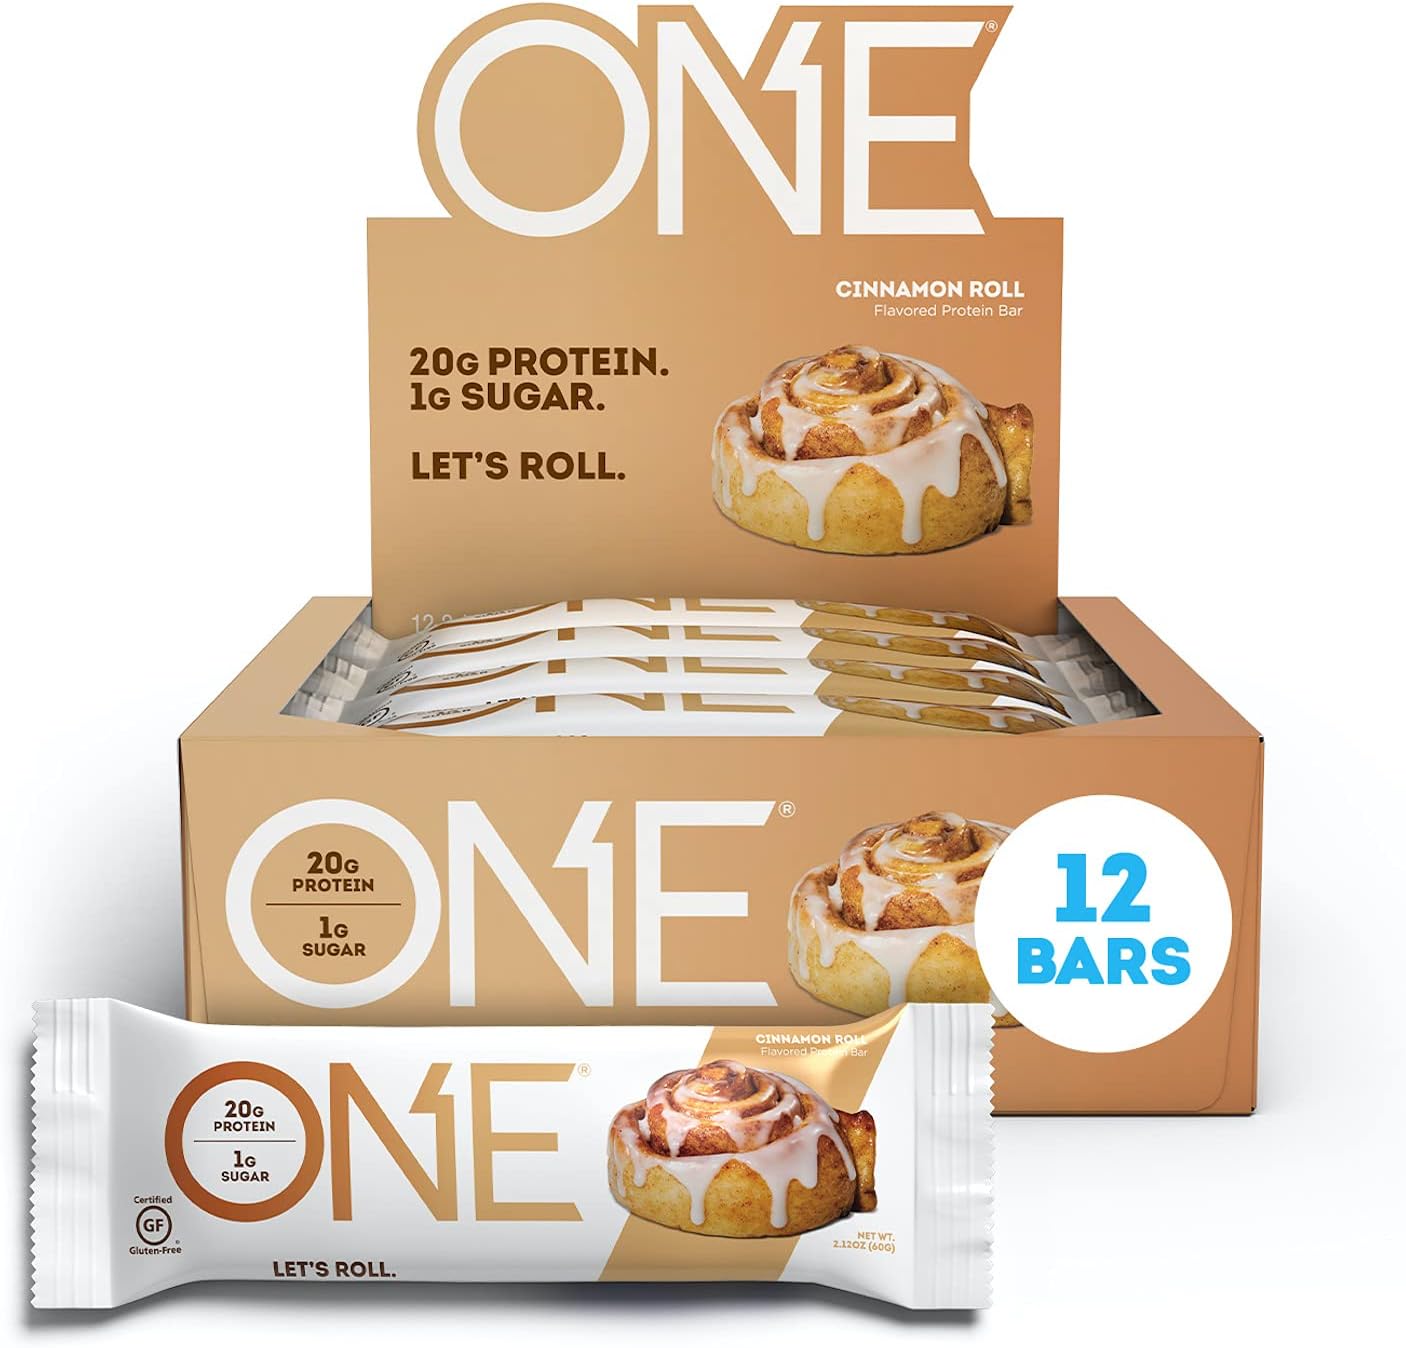 ONE Protein Bars, Cinnamon Roll, Gluten Free Protein Bars with 20g Protein and Only 1g Sugar, Guilt-Free Snacking for High Protein Diets, 2.12 oz (12 Count)